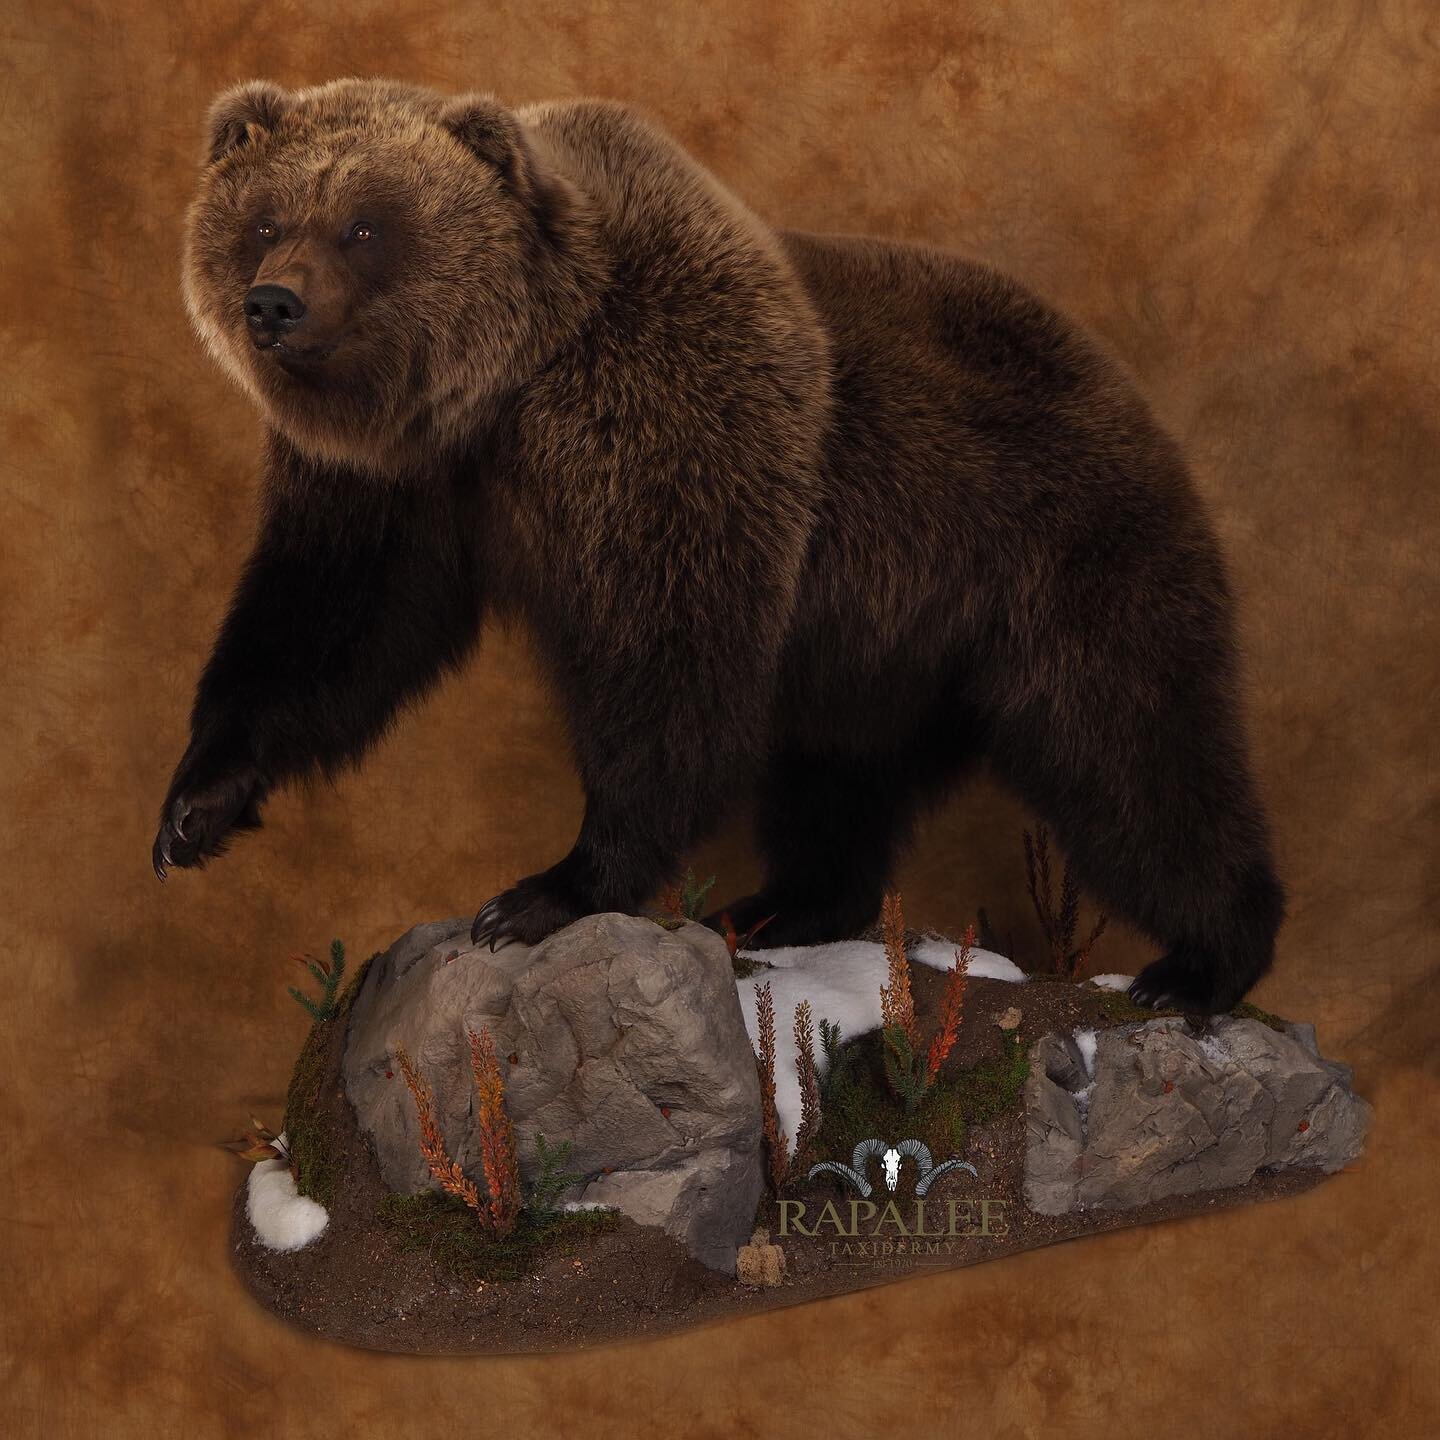 We took a 7 week break from Instagram and have lots of photos to share in the future. Here is a Brown Bear to start the show. #rapaleetaxidermy #worldclasstaxidermy #virginiataxidermy #virginiataxidermist #alaskahunting #beartaxidermy